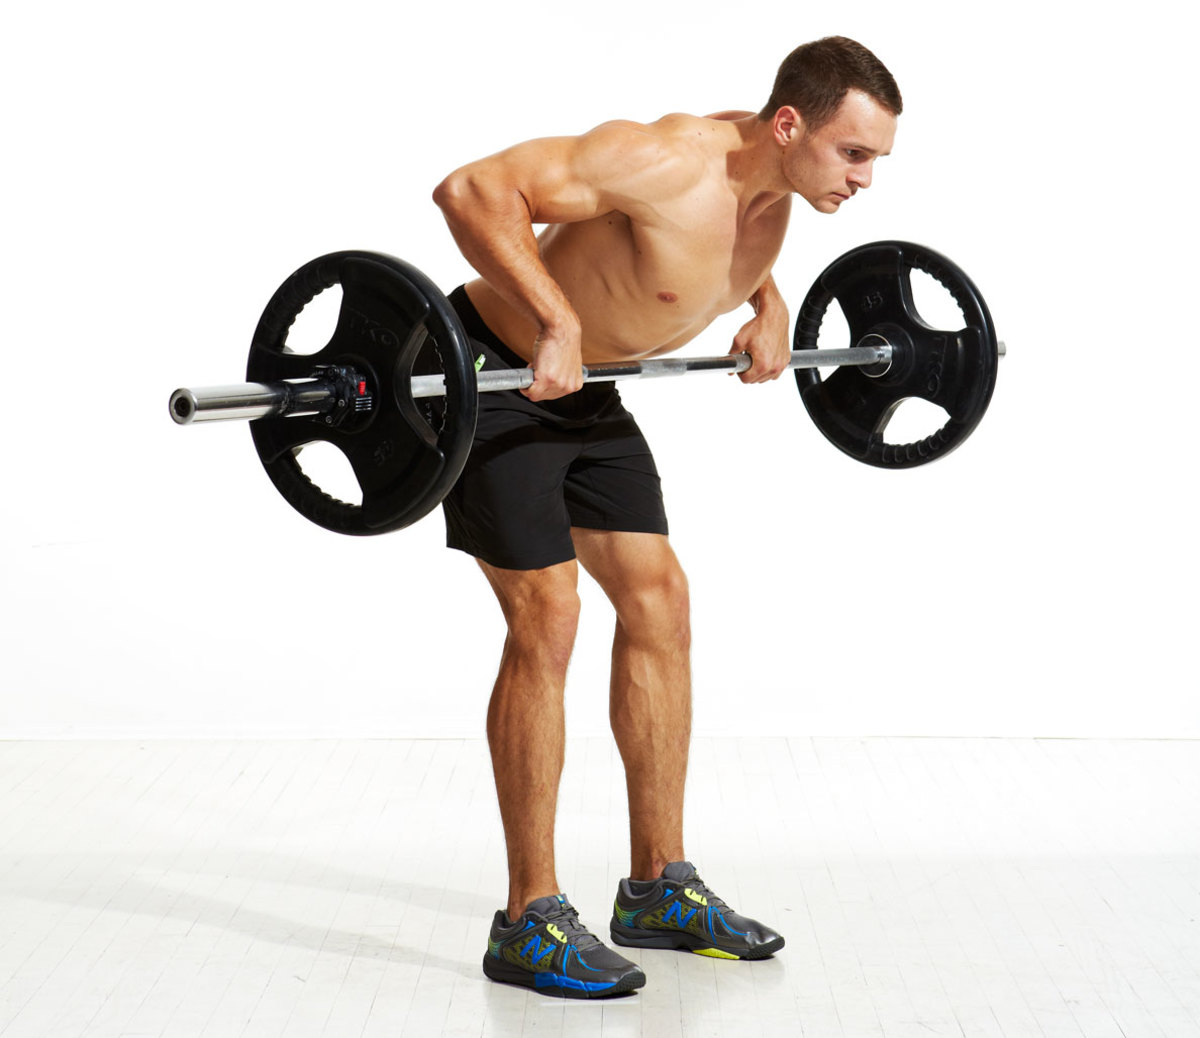 15 Minute Barbell Complex Workout for Weight Loss